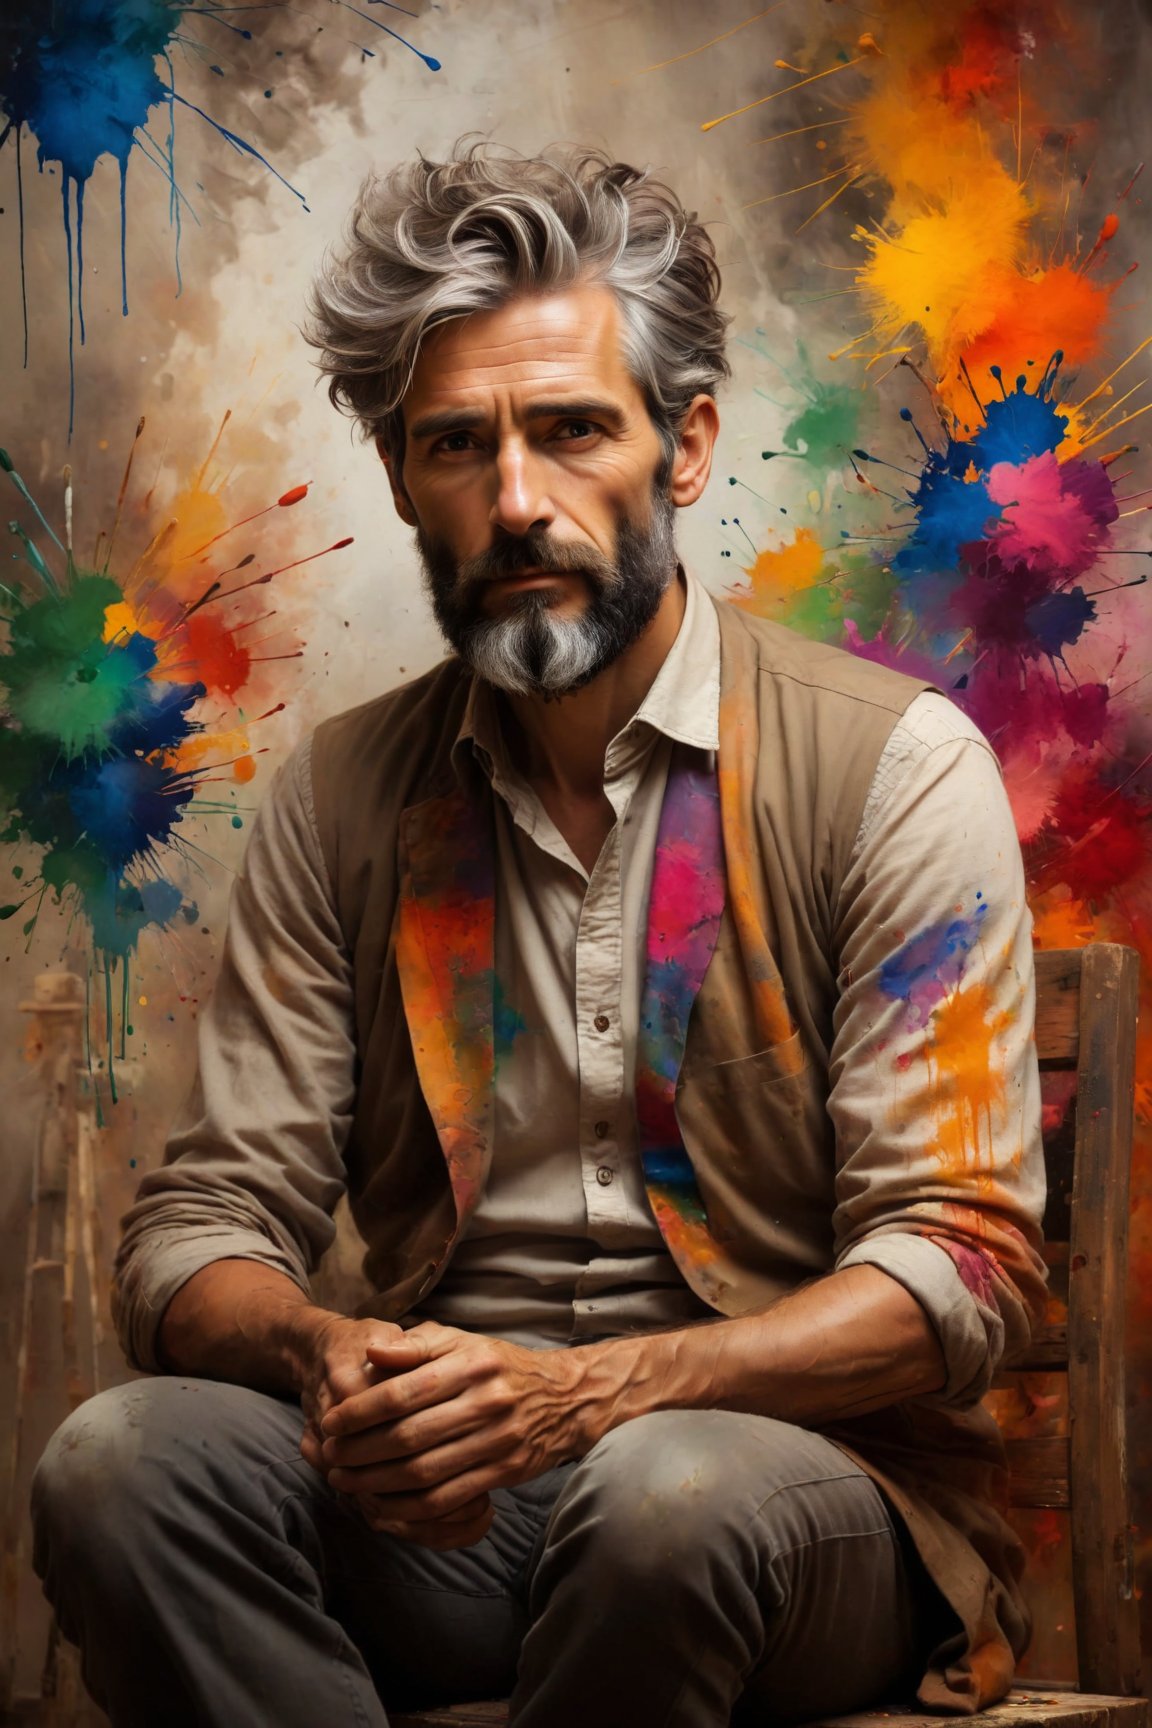 An elegant portrait capturing the essence of a contemplative artist lost in thought, surrounded by scattered brushes and vibrant splashes of color, with soft, diffused lighting illuminating their features